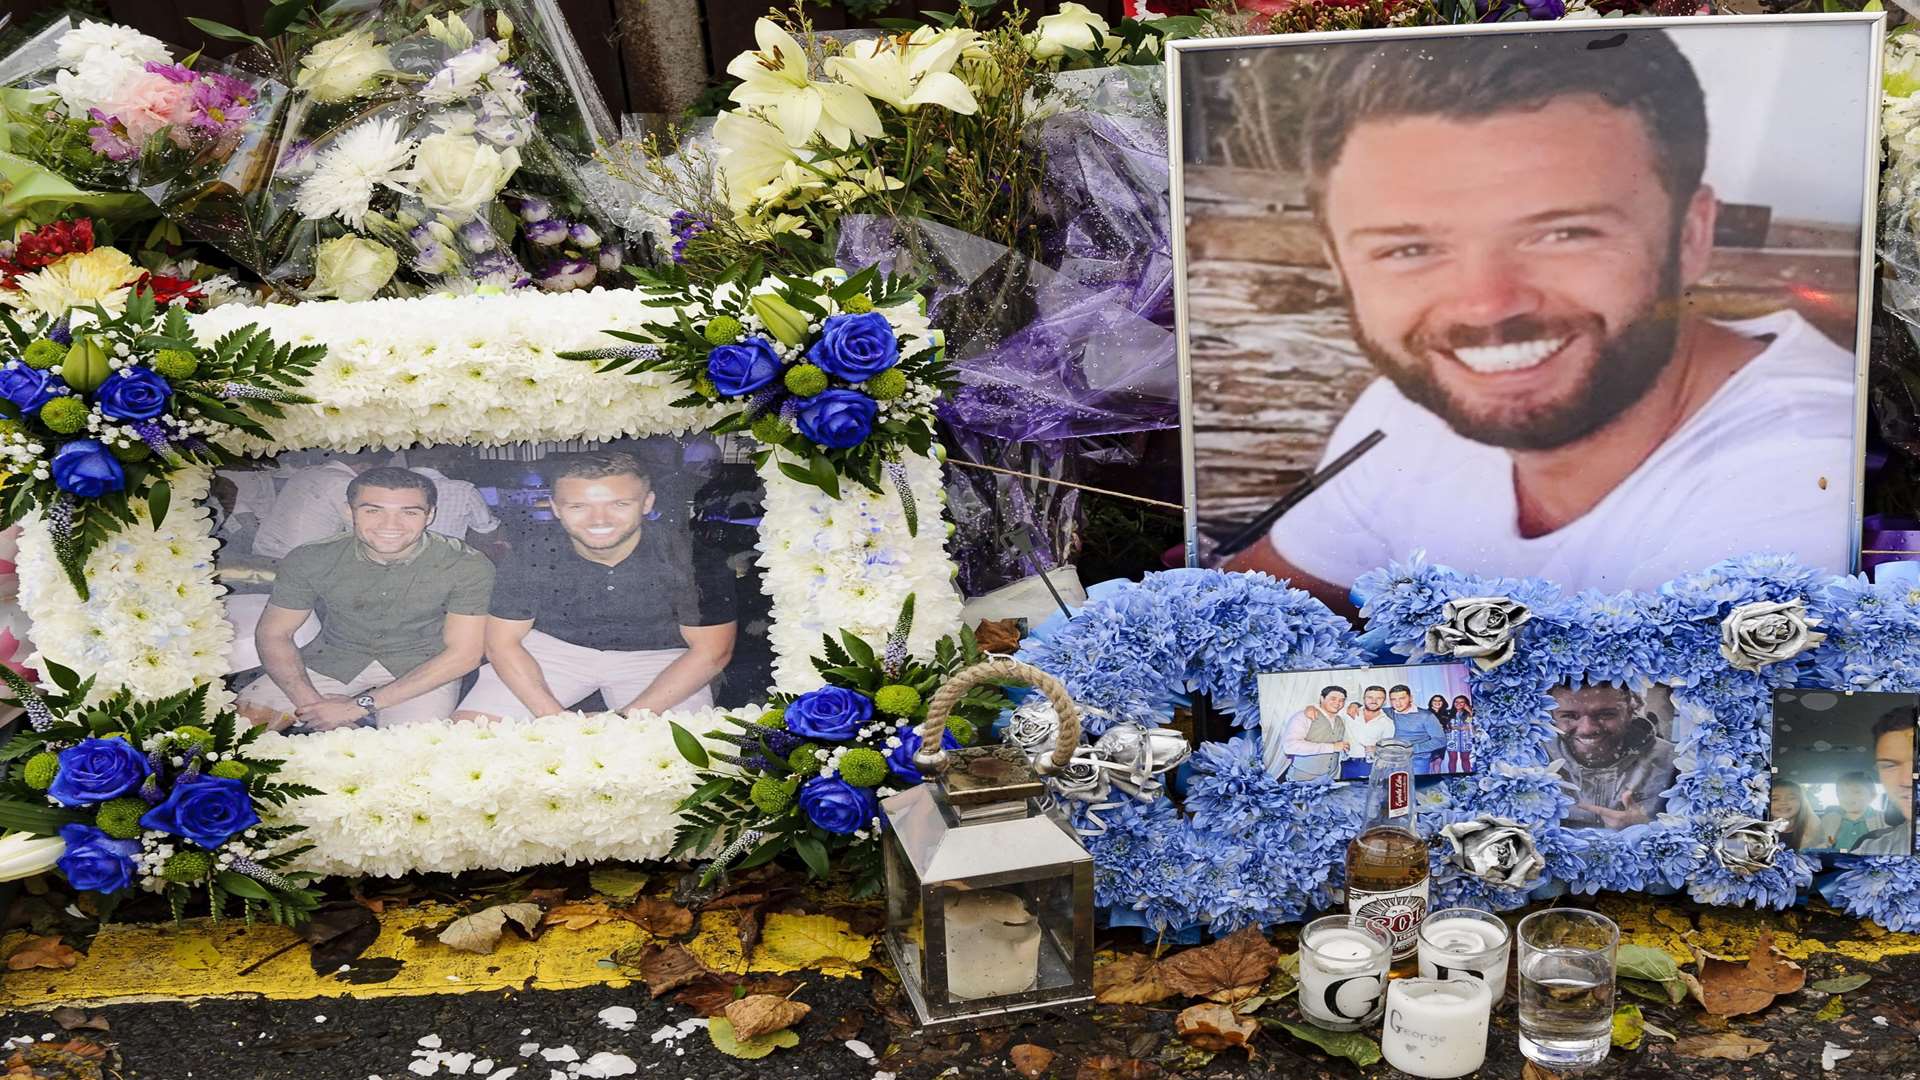 Photo and memories were among the floral tributes left for George Barker